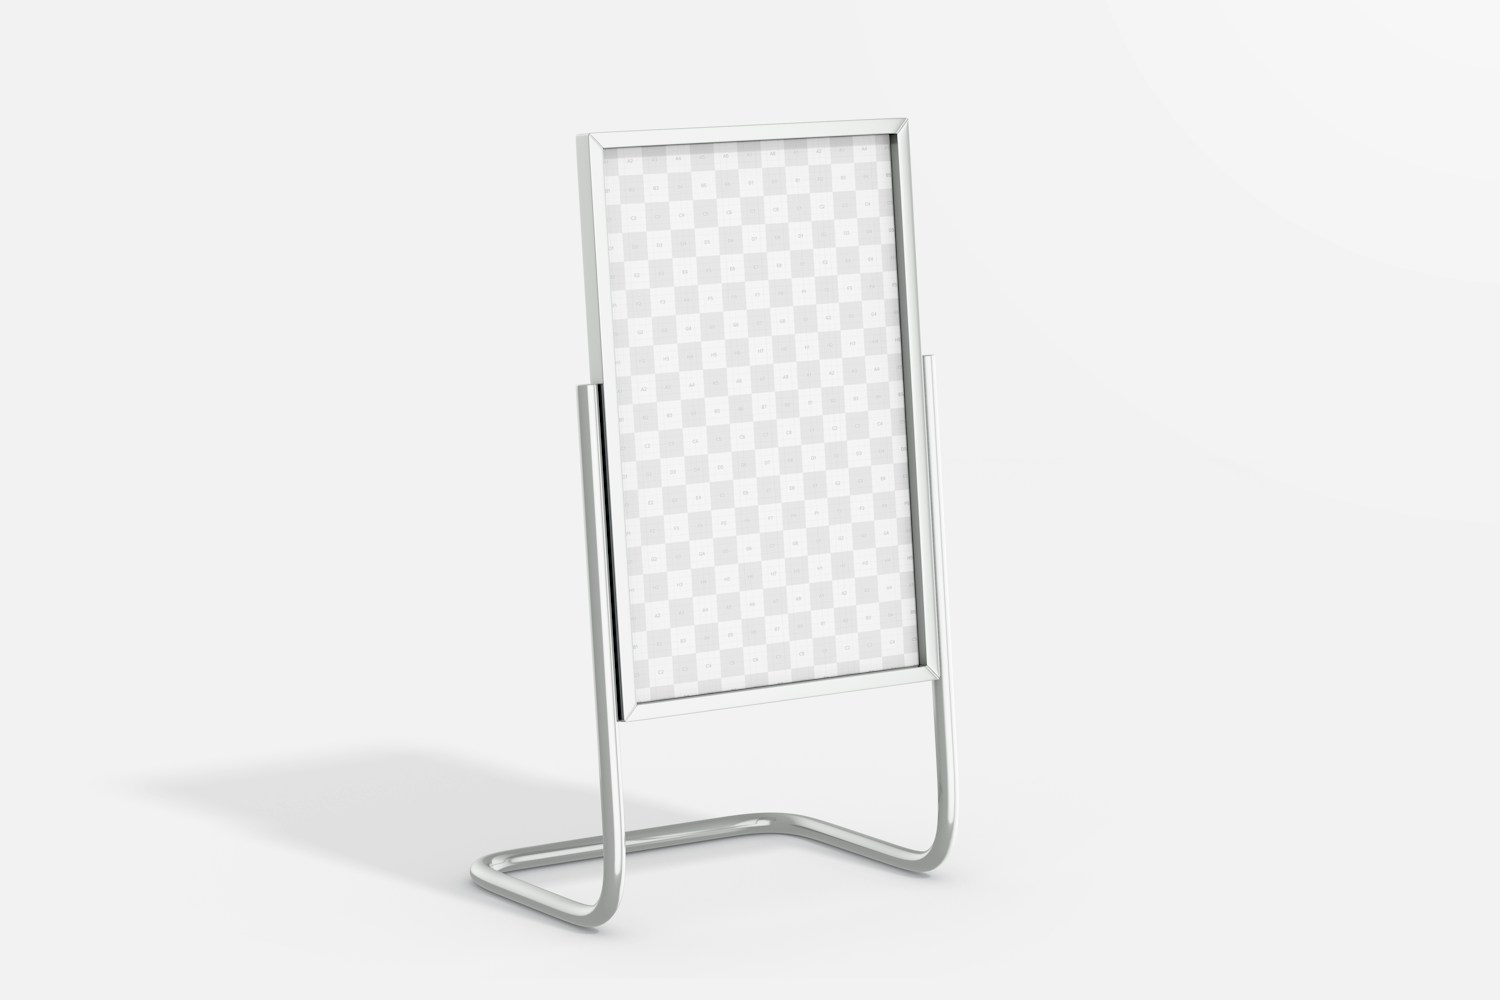 Advertisement Sign Stand Mockup, Perspective